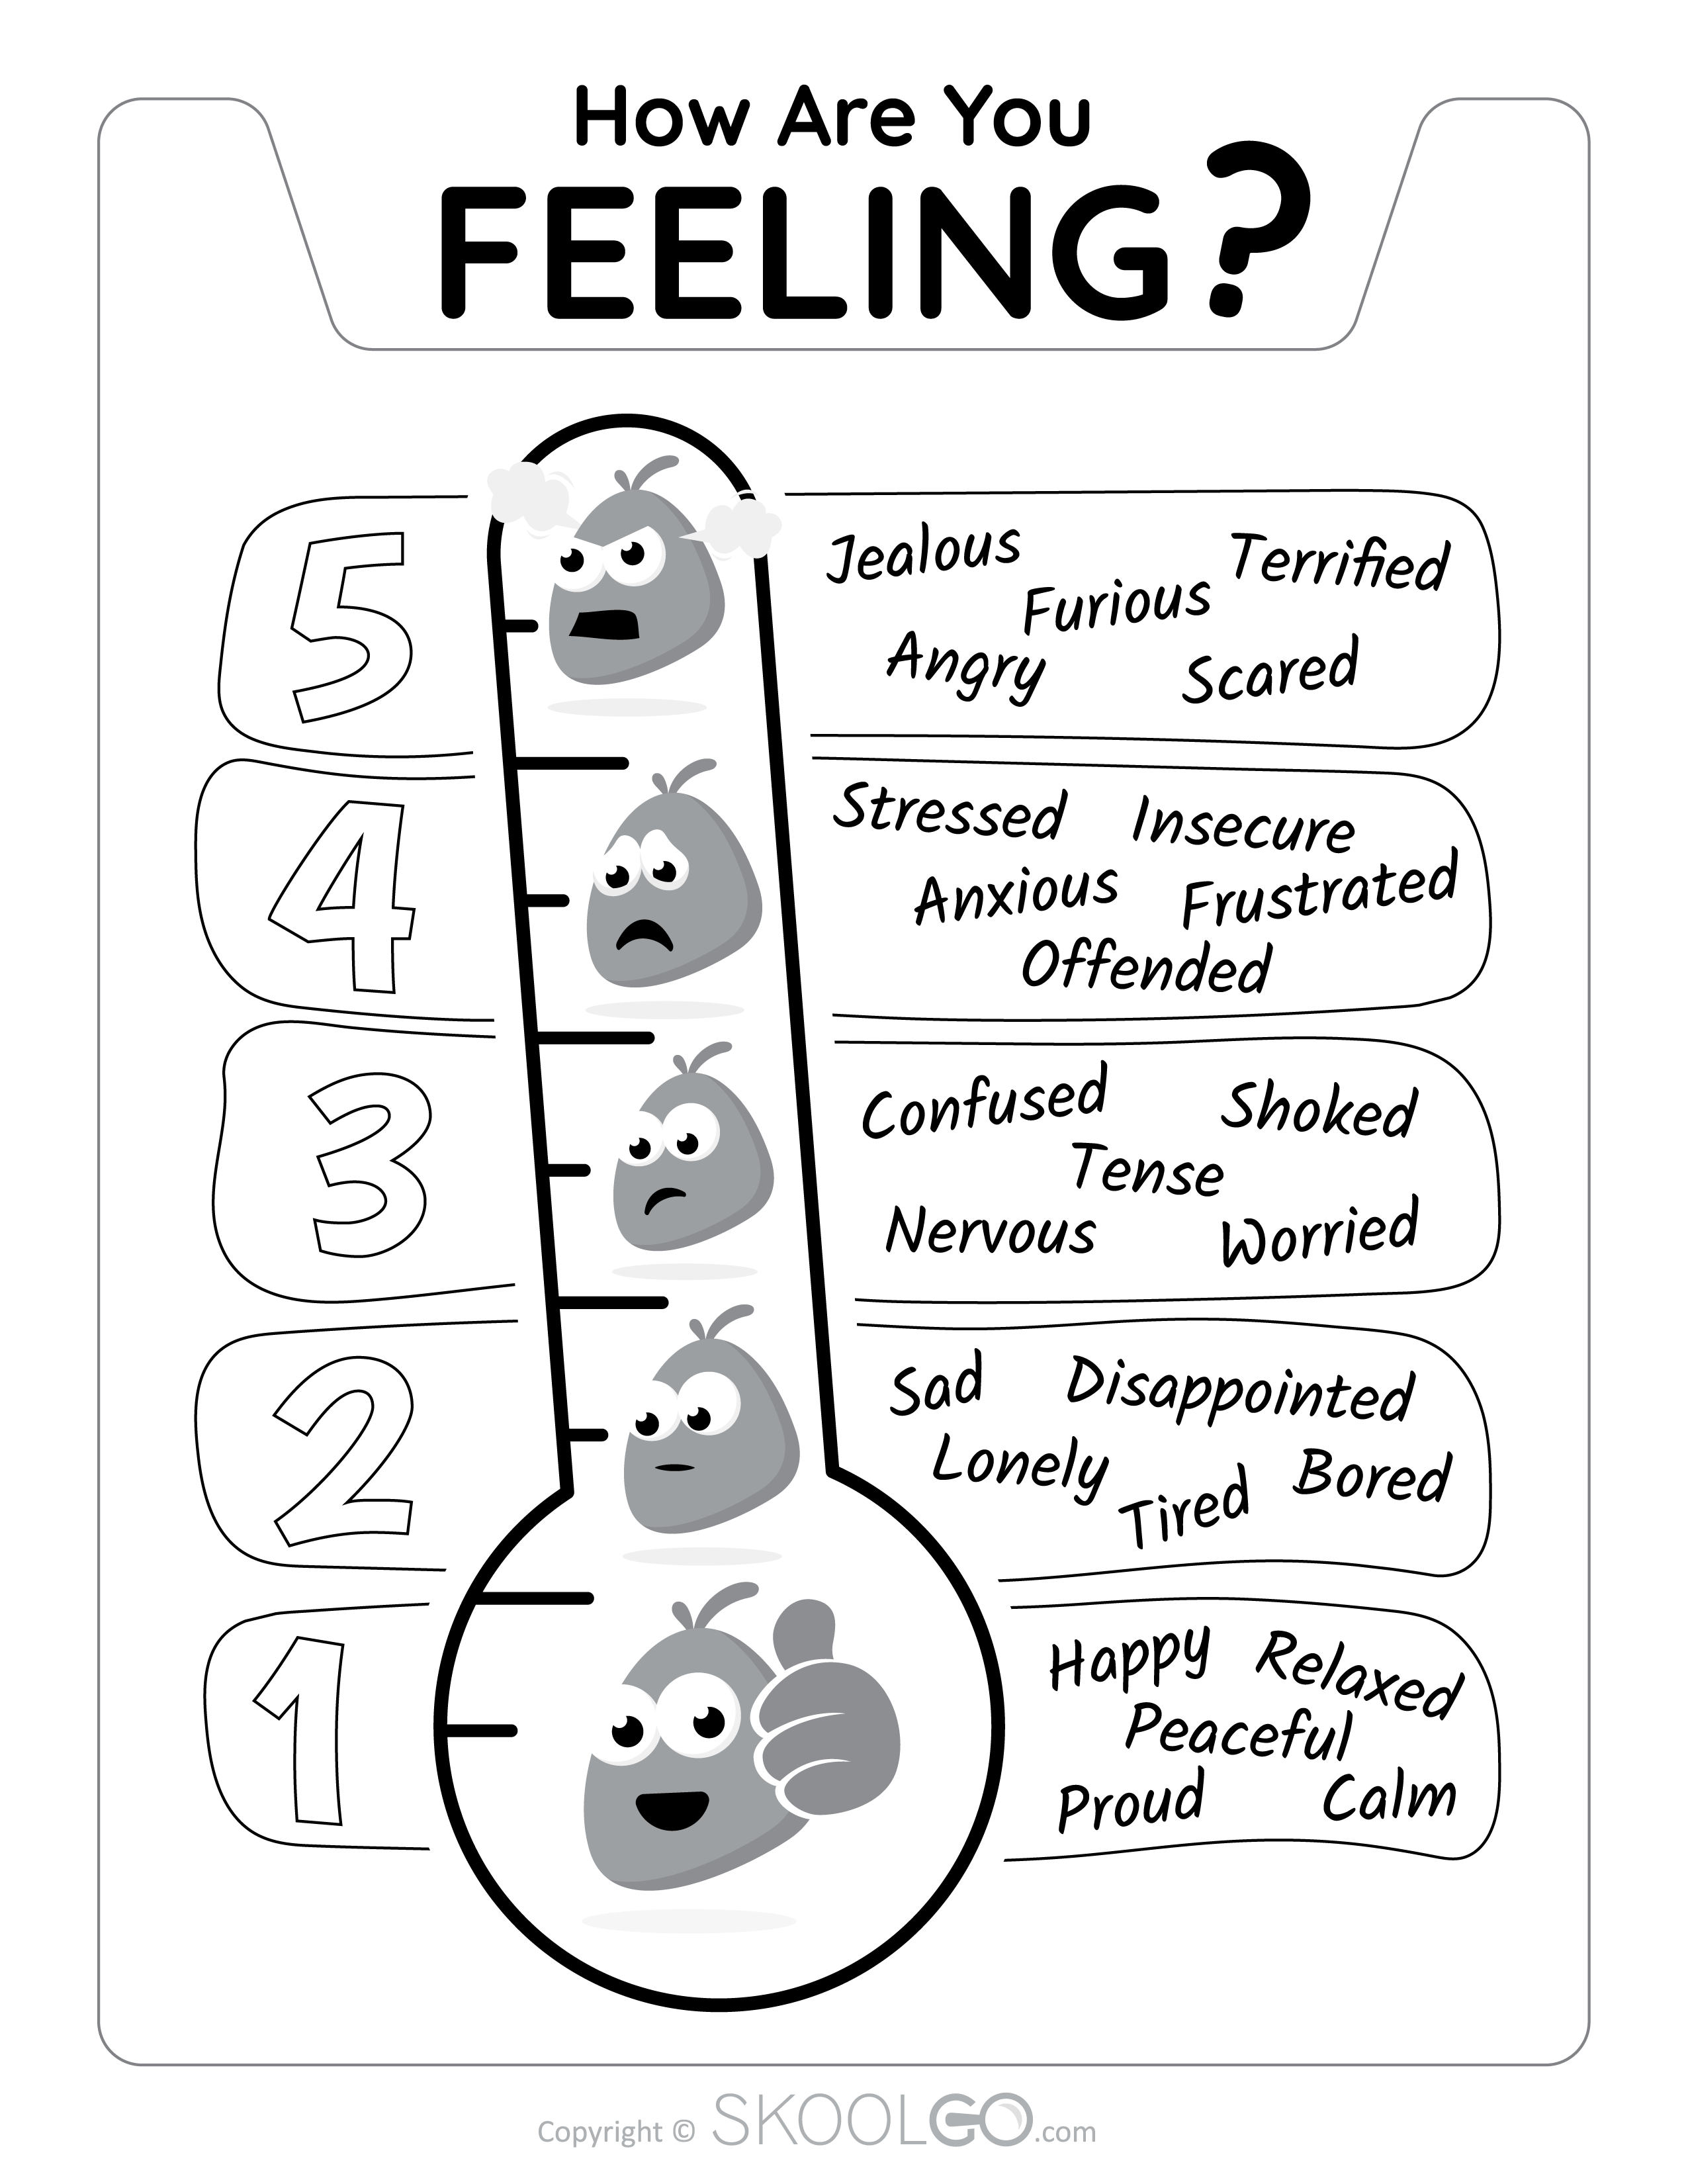 How Are You Feeling - Free Classroom Poster Black and White